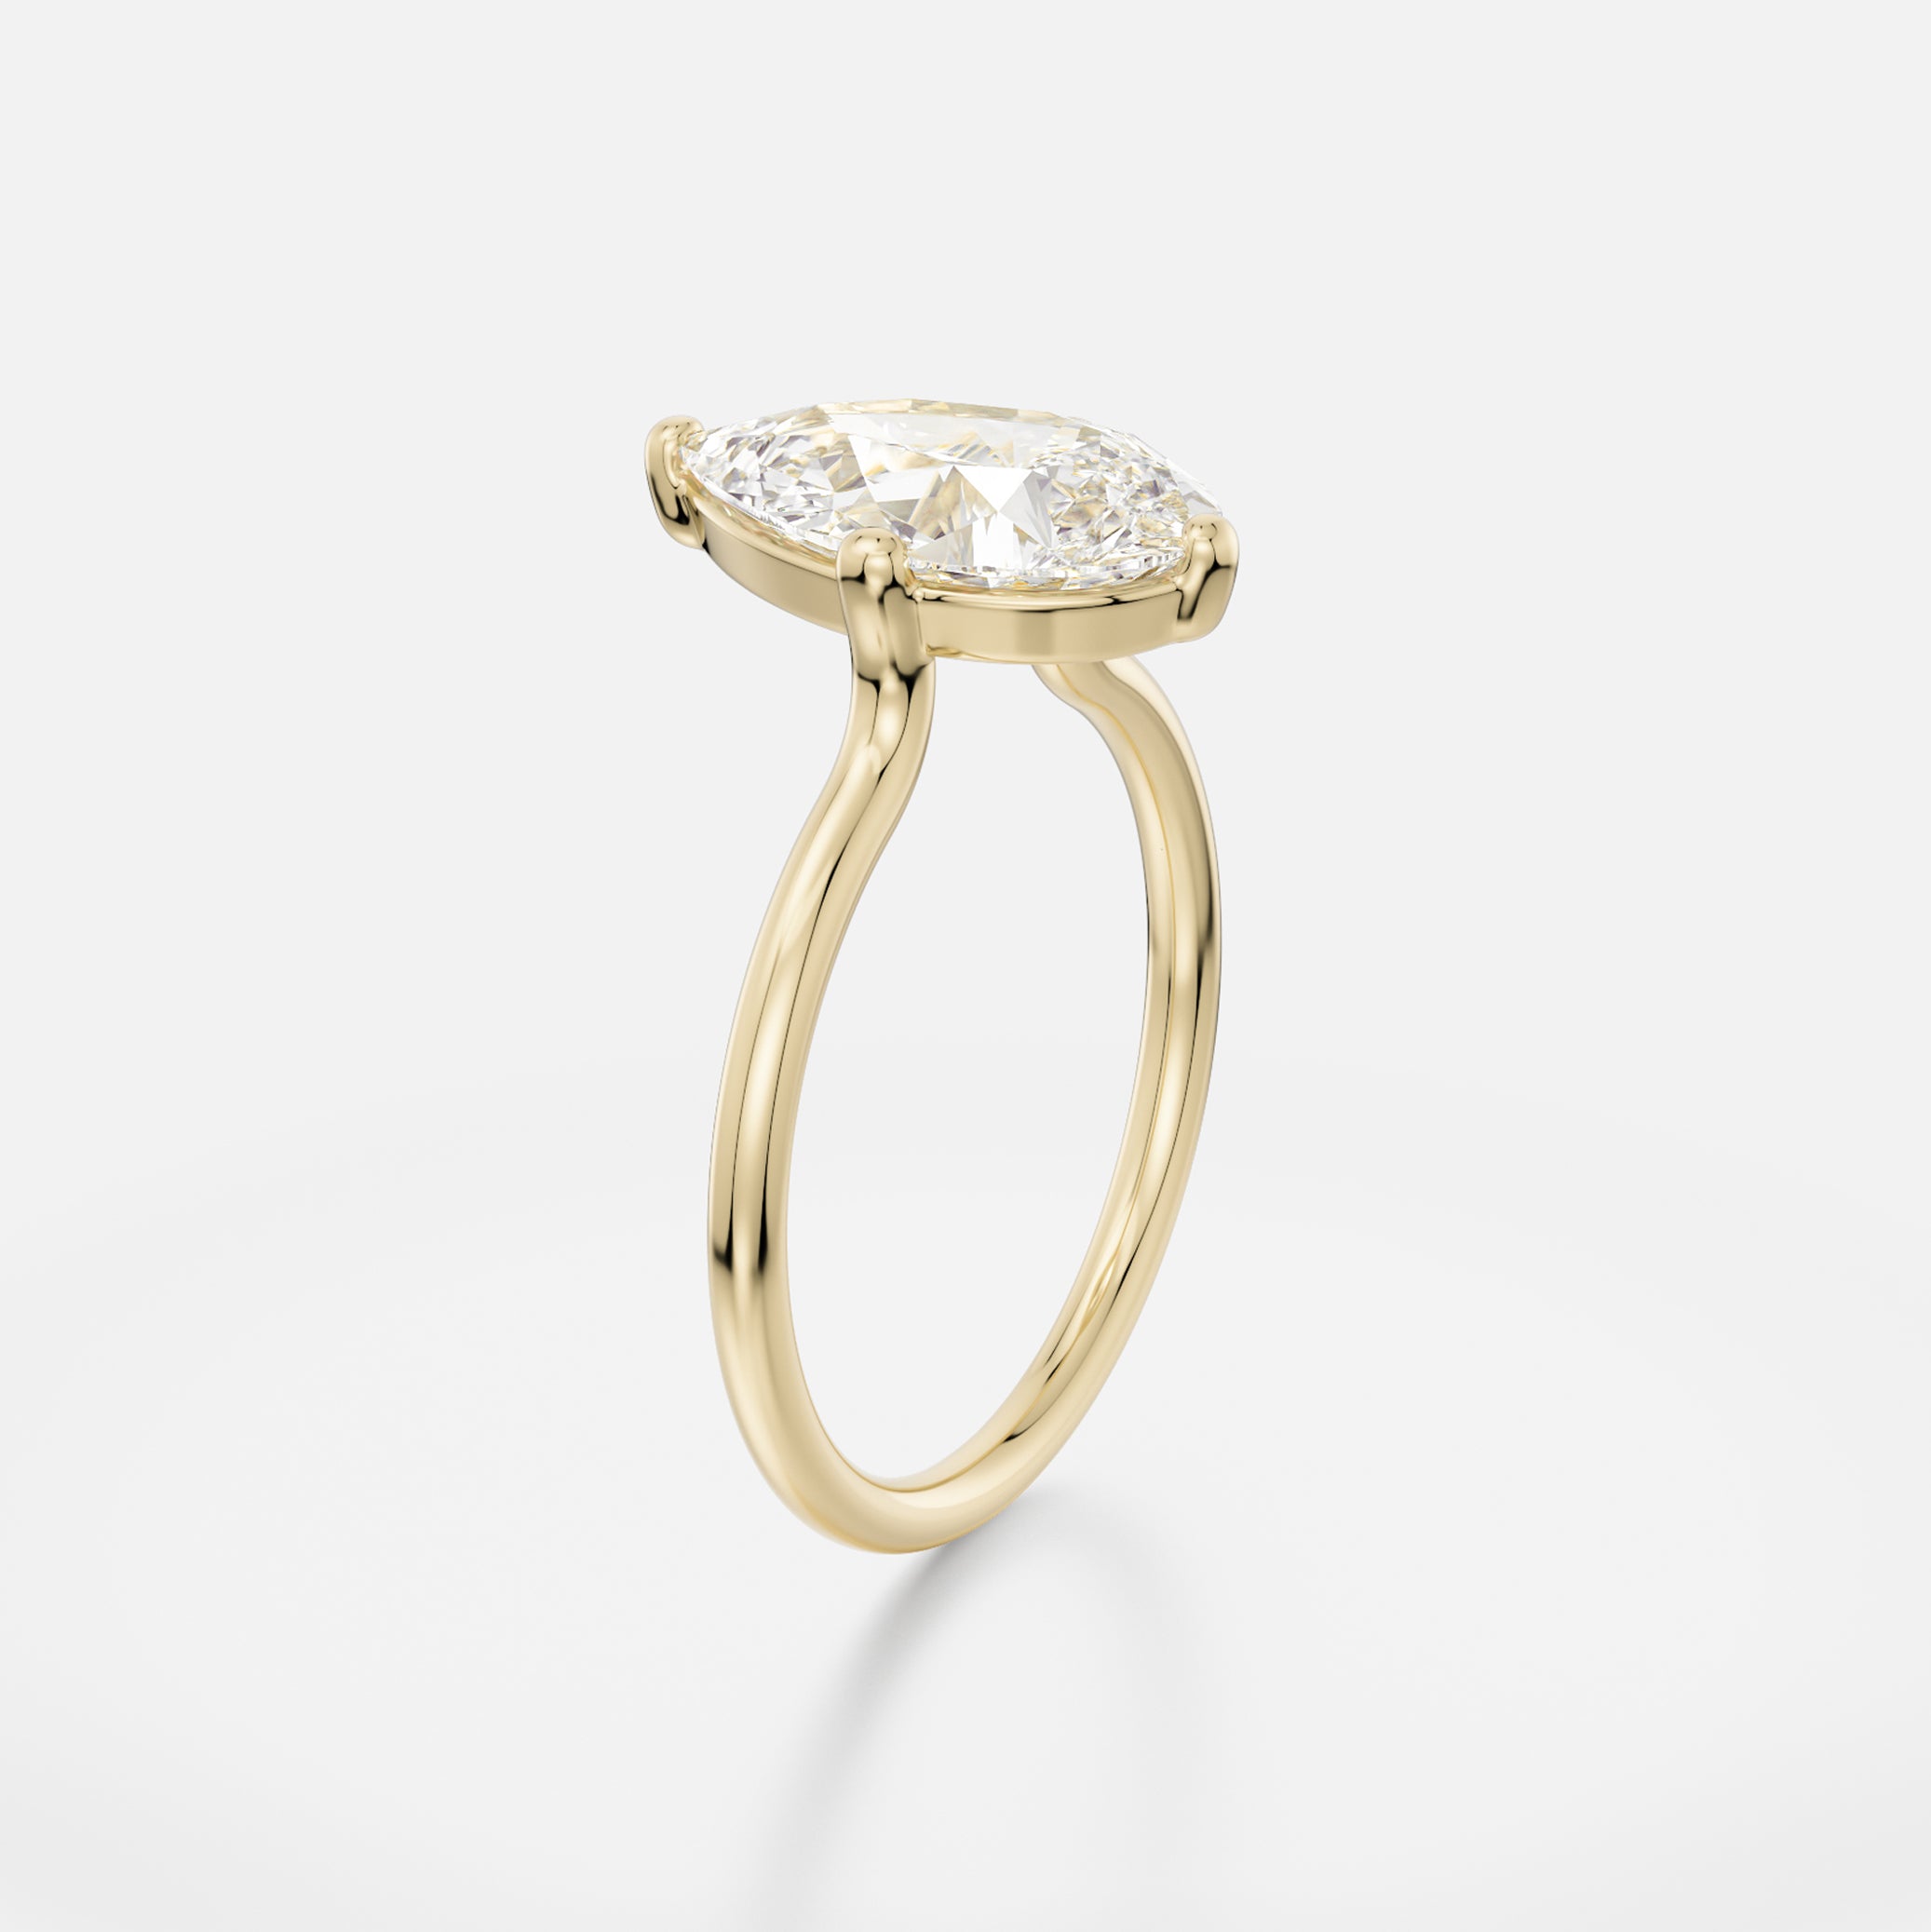 Veli Thin Band with North South Pear Modern Engagement Ring Setting in 14 karat yellow, white, or rose Gold or platinum by SHW Fine Jewelry New York City